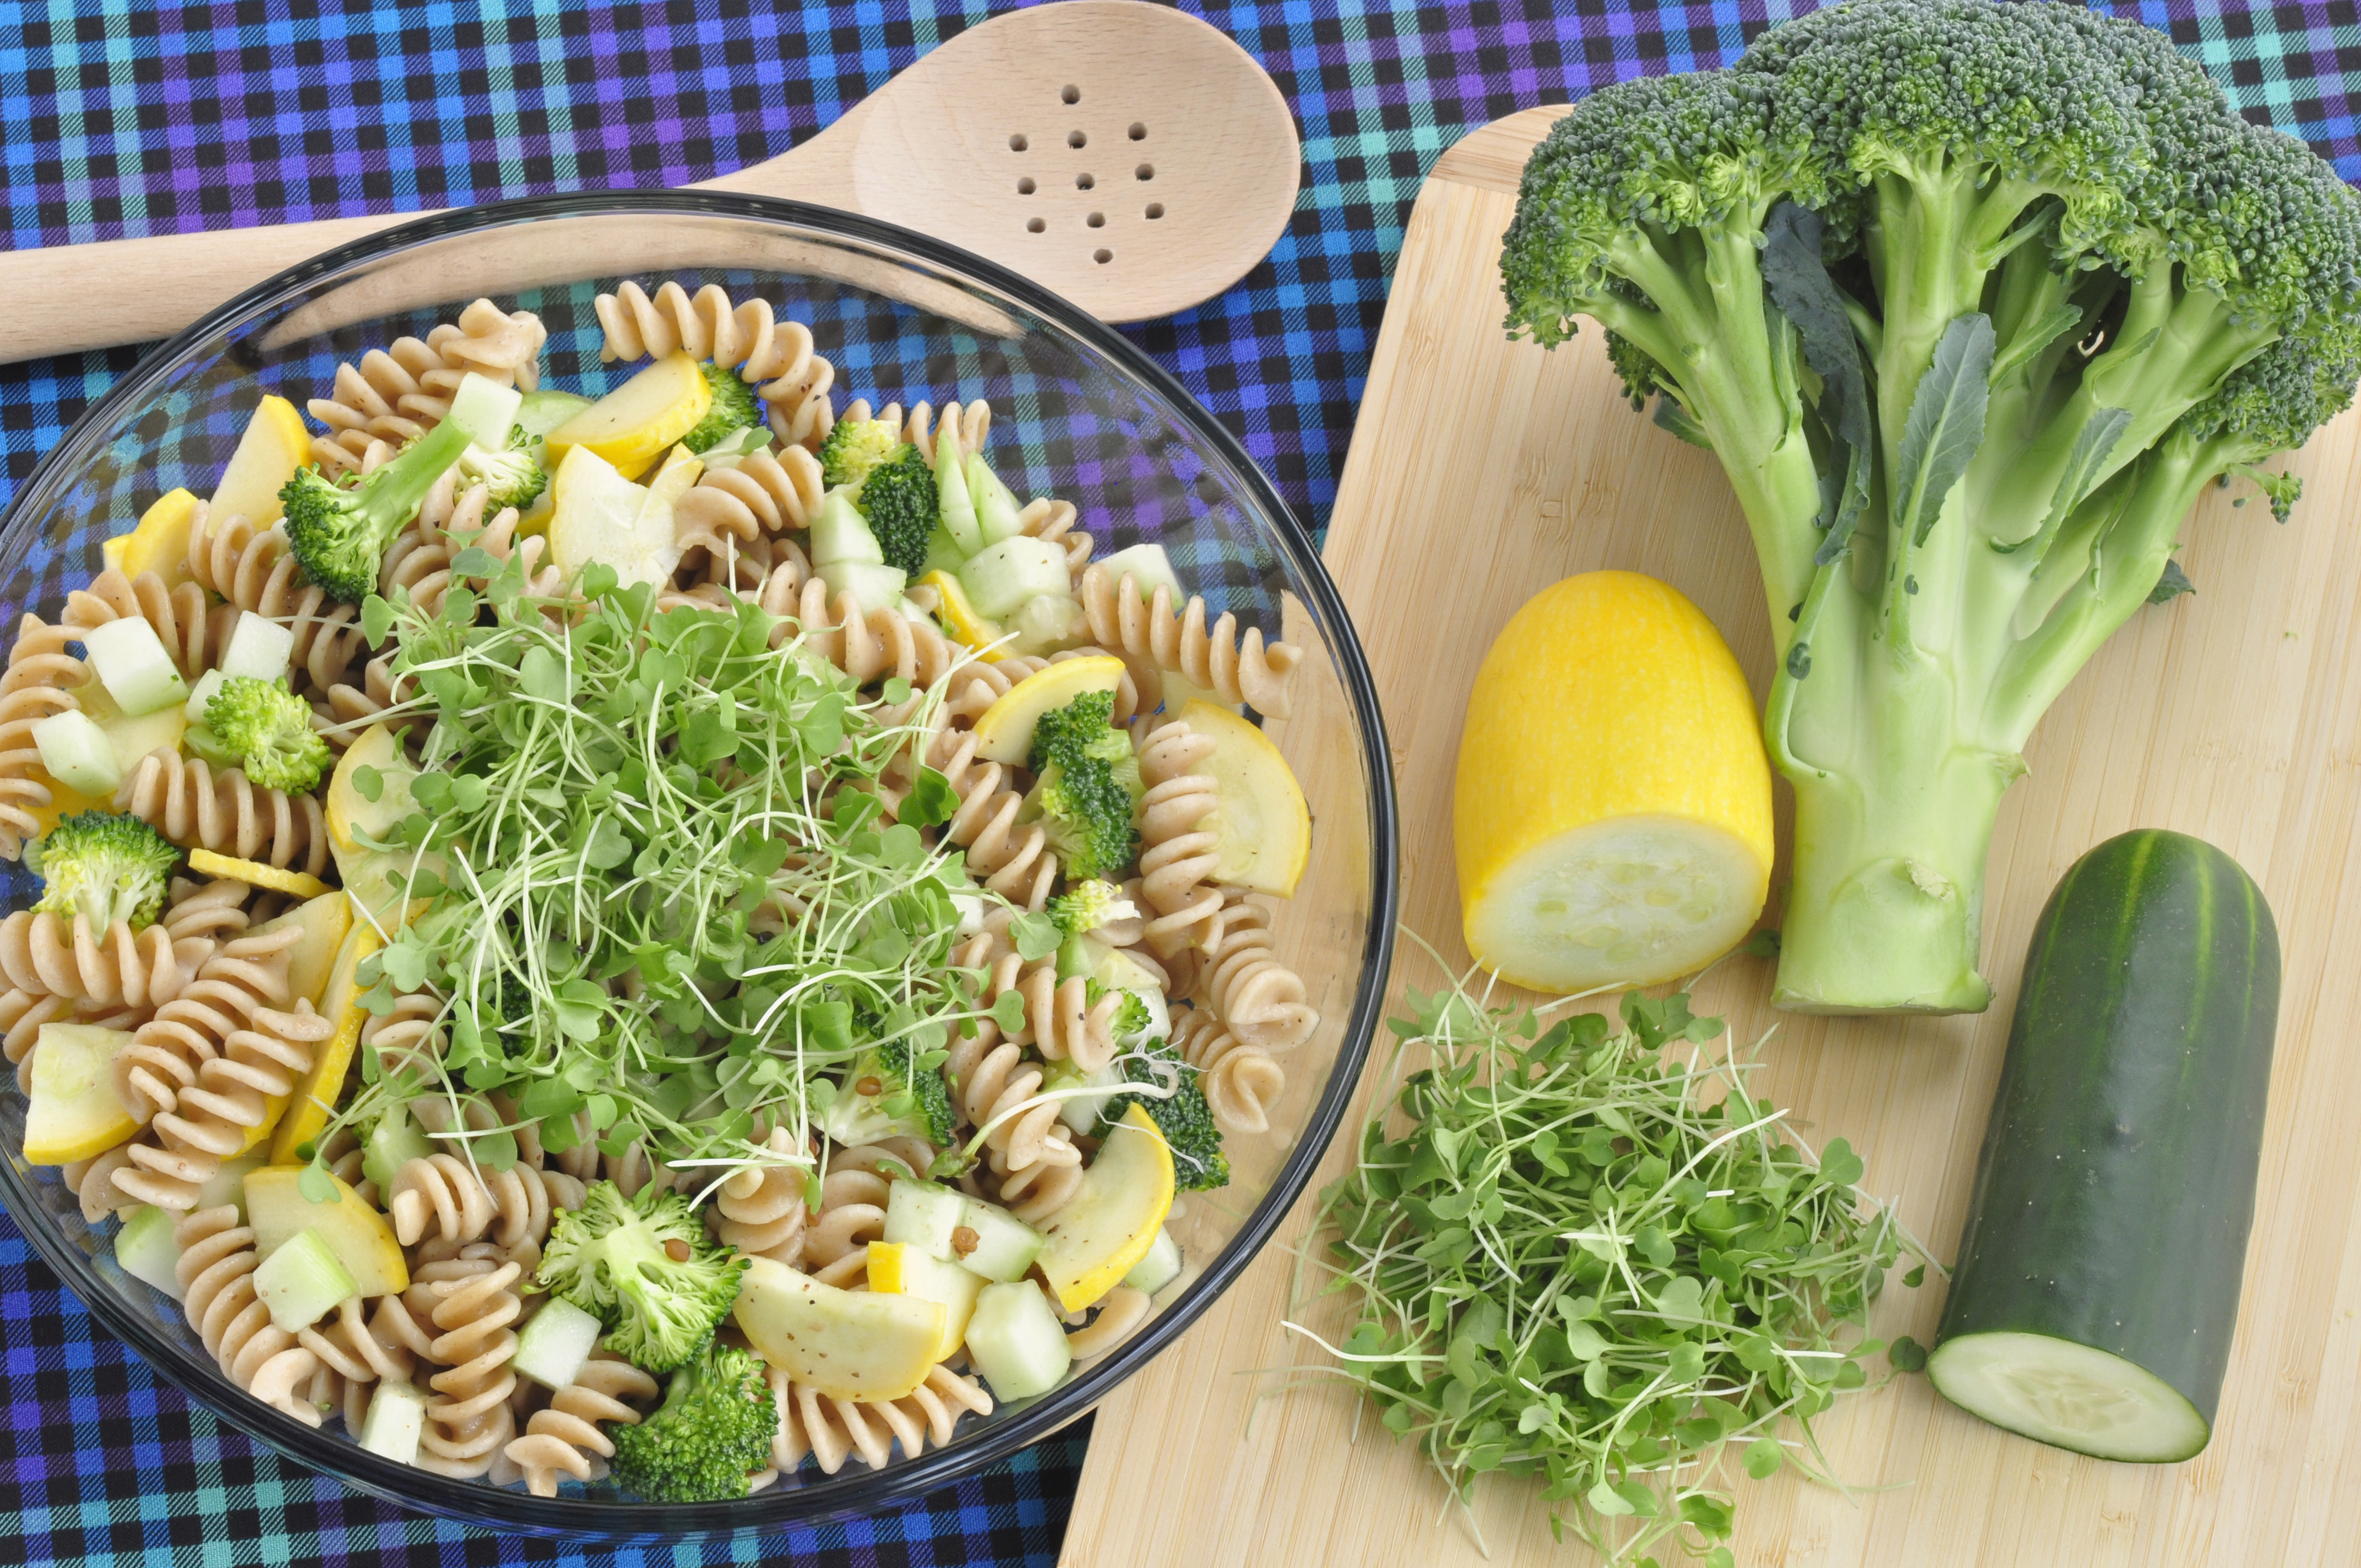 Summer Vegetable and Pasta Salad in clear bowl